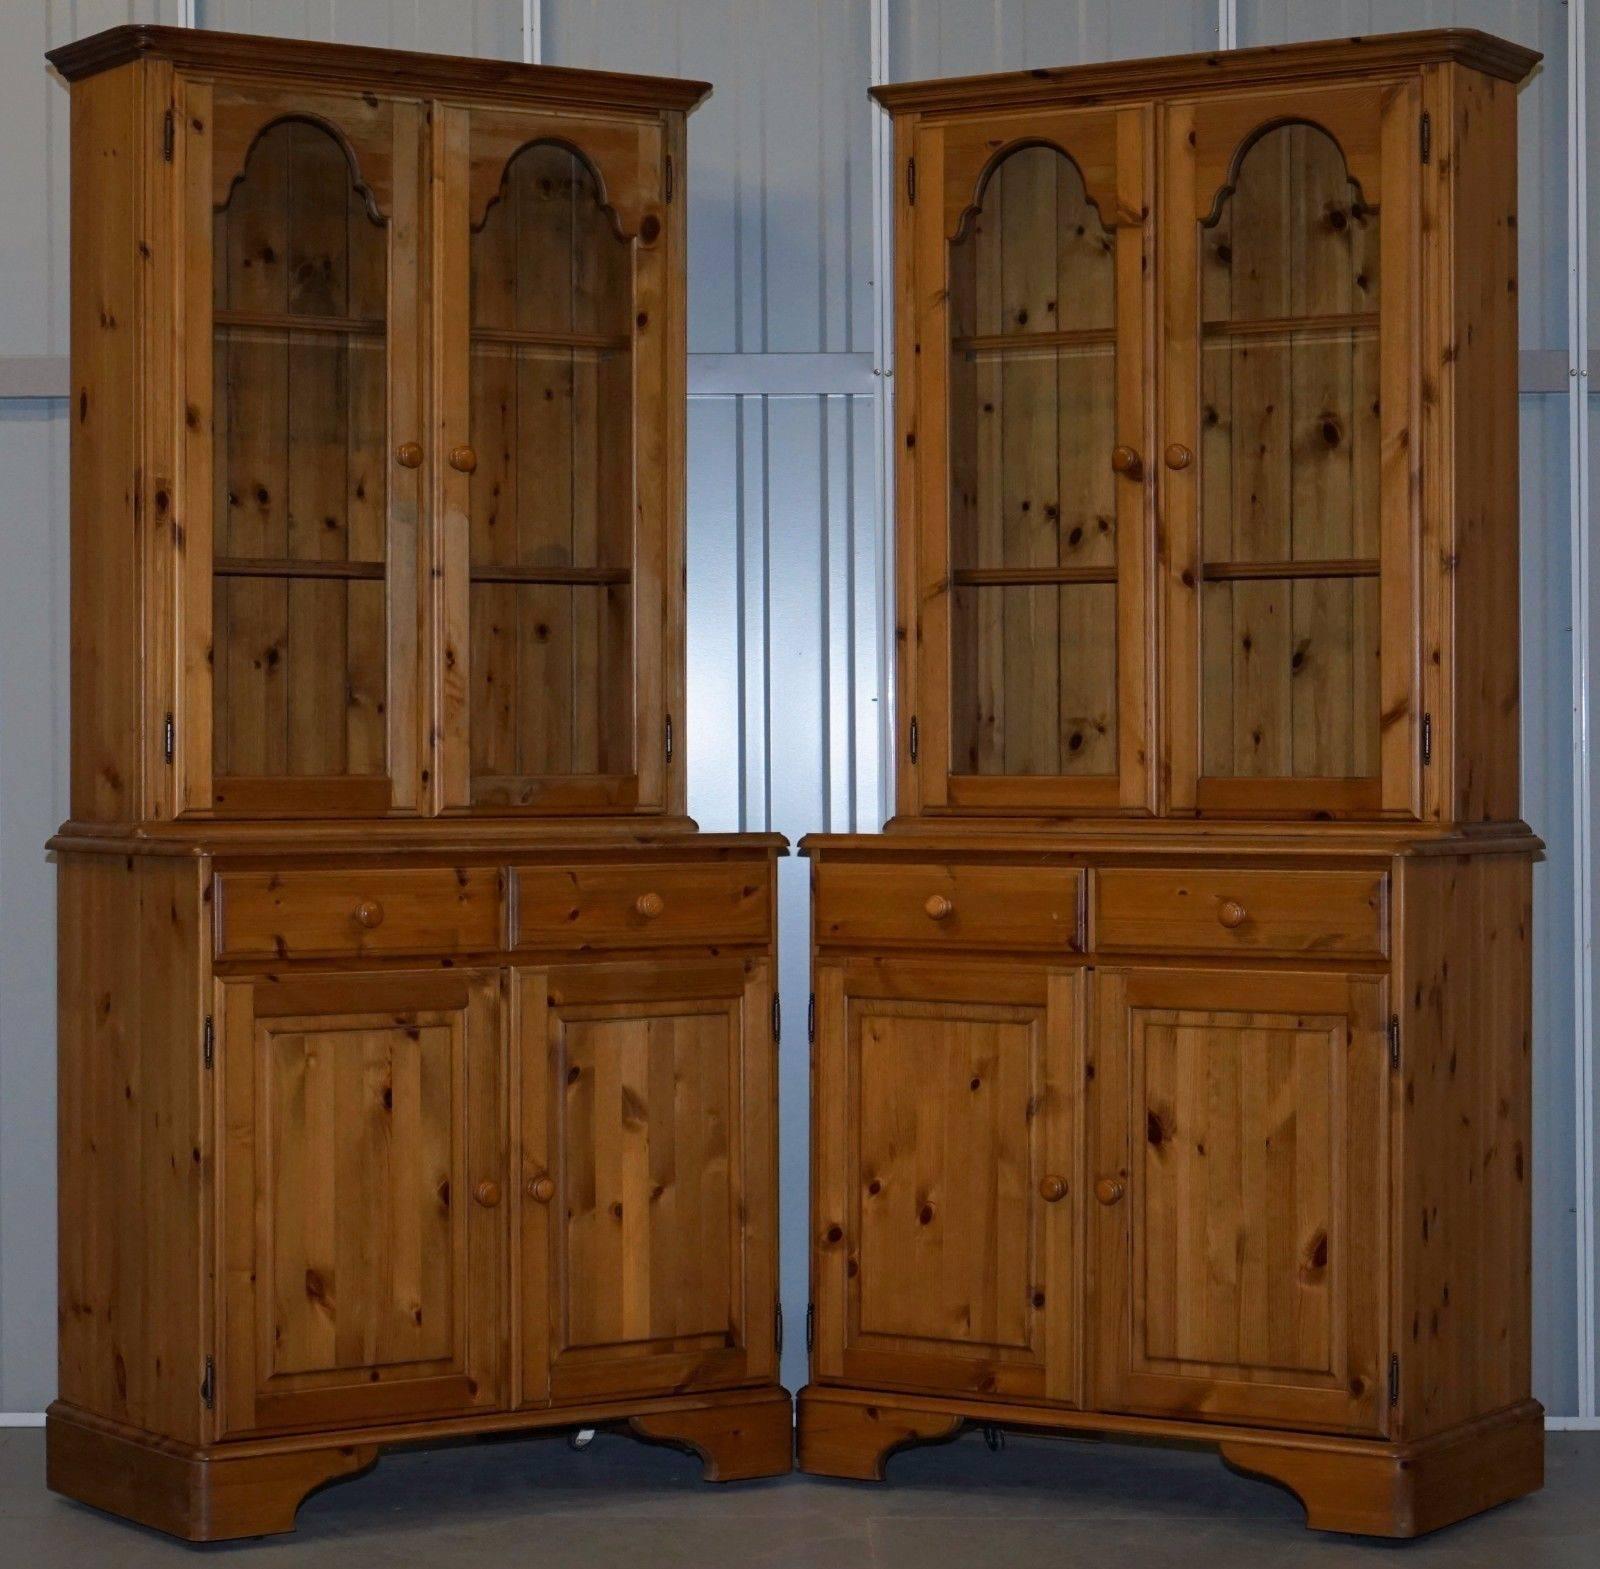 We are delighted to offer for sale 1 of 2 solid English Pine Ducal welsh dresser bookcases

I am listing these separately as they are in slightly difference conditions, this one is in a little better condition, it stills has some marks and wear